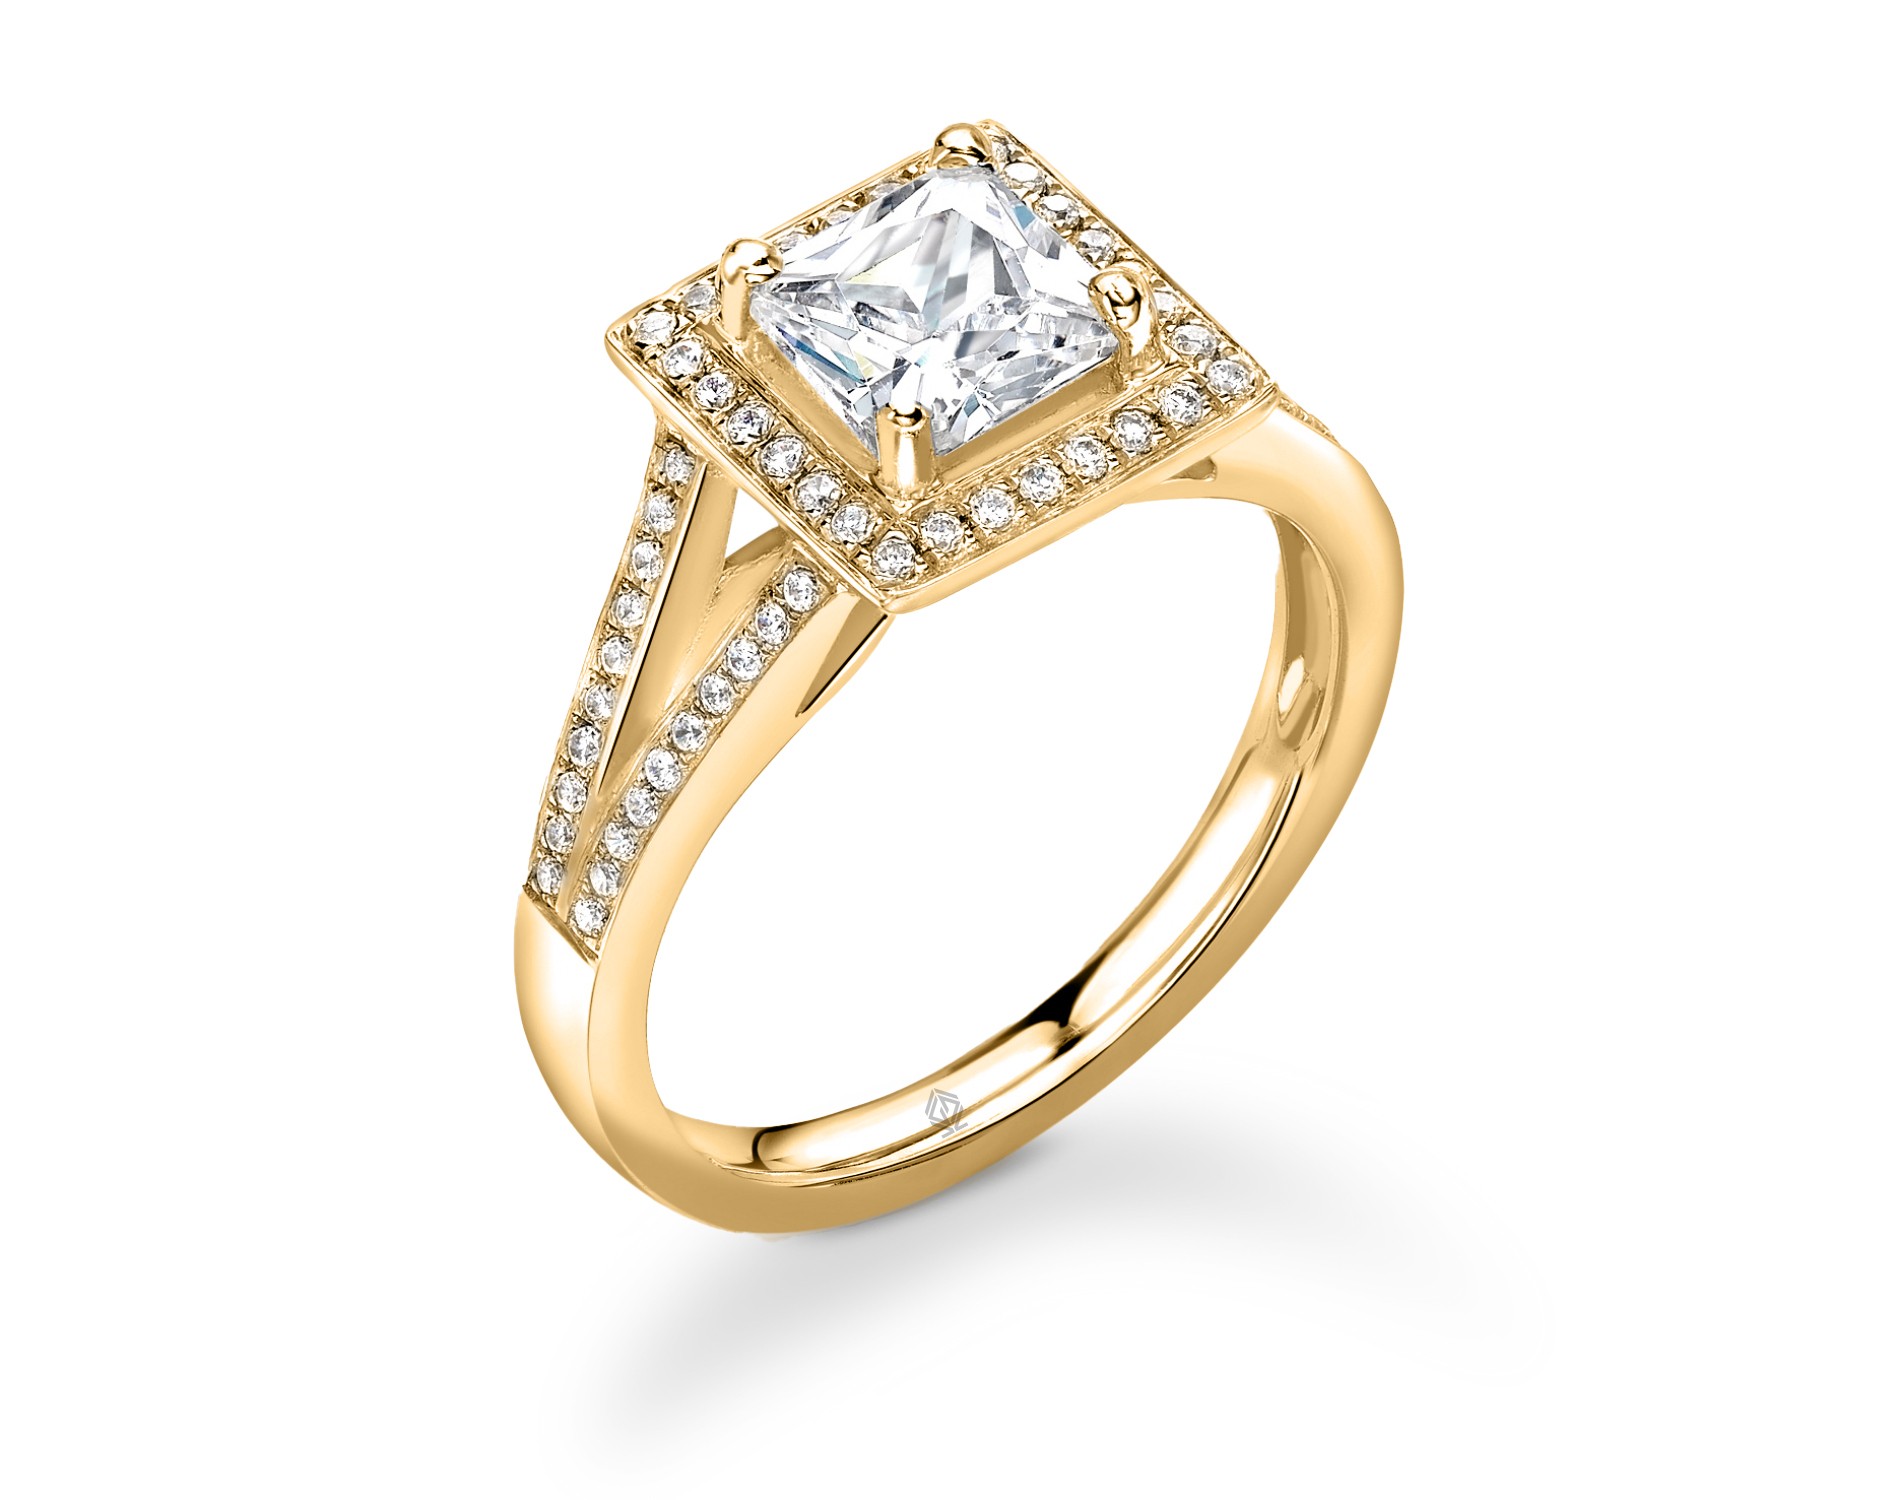 18K YELLOW GOLD HALO PRINCESS CUT DIAMOND ENGAGEMENT RING WITH SIDE STONES CHANNEL SET